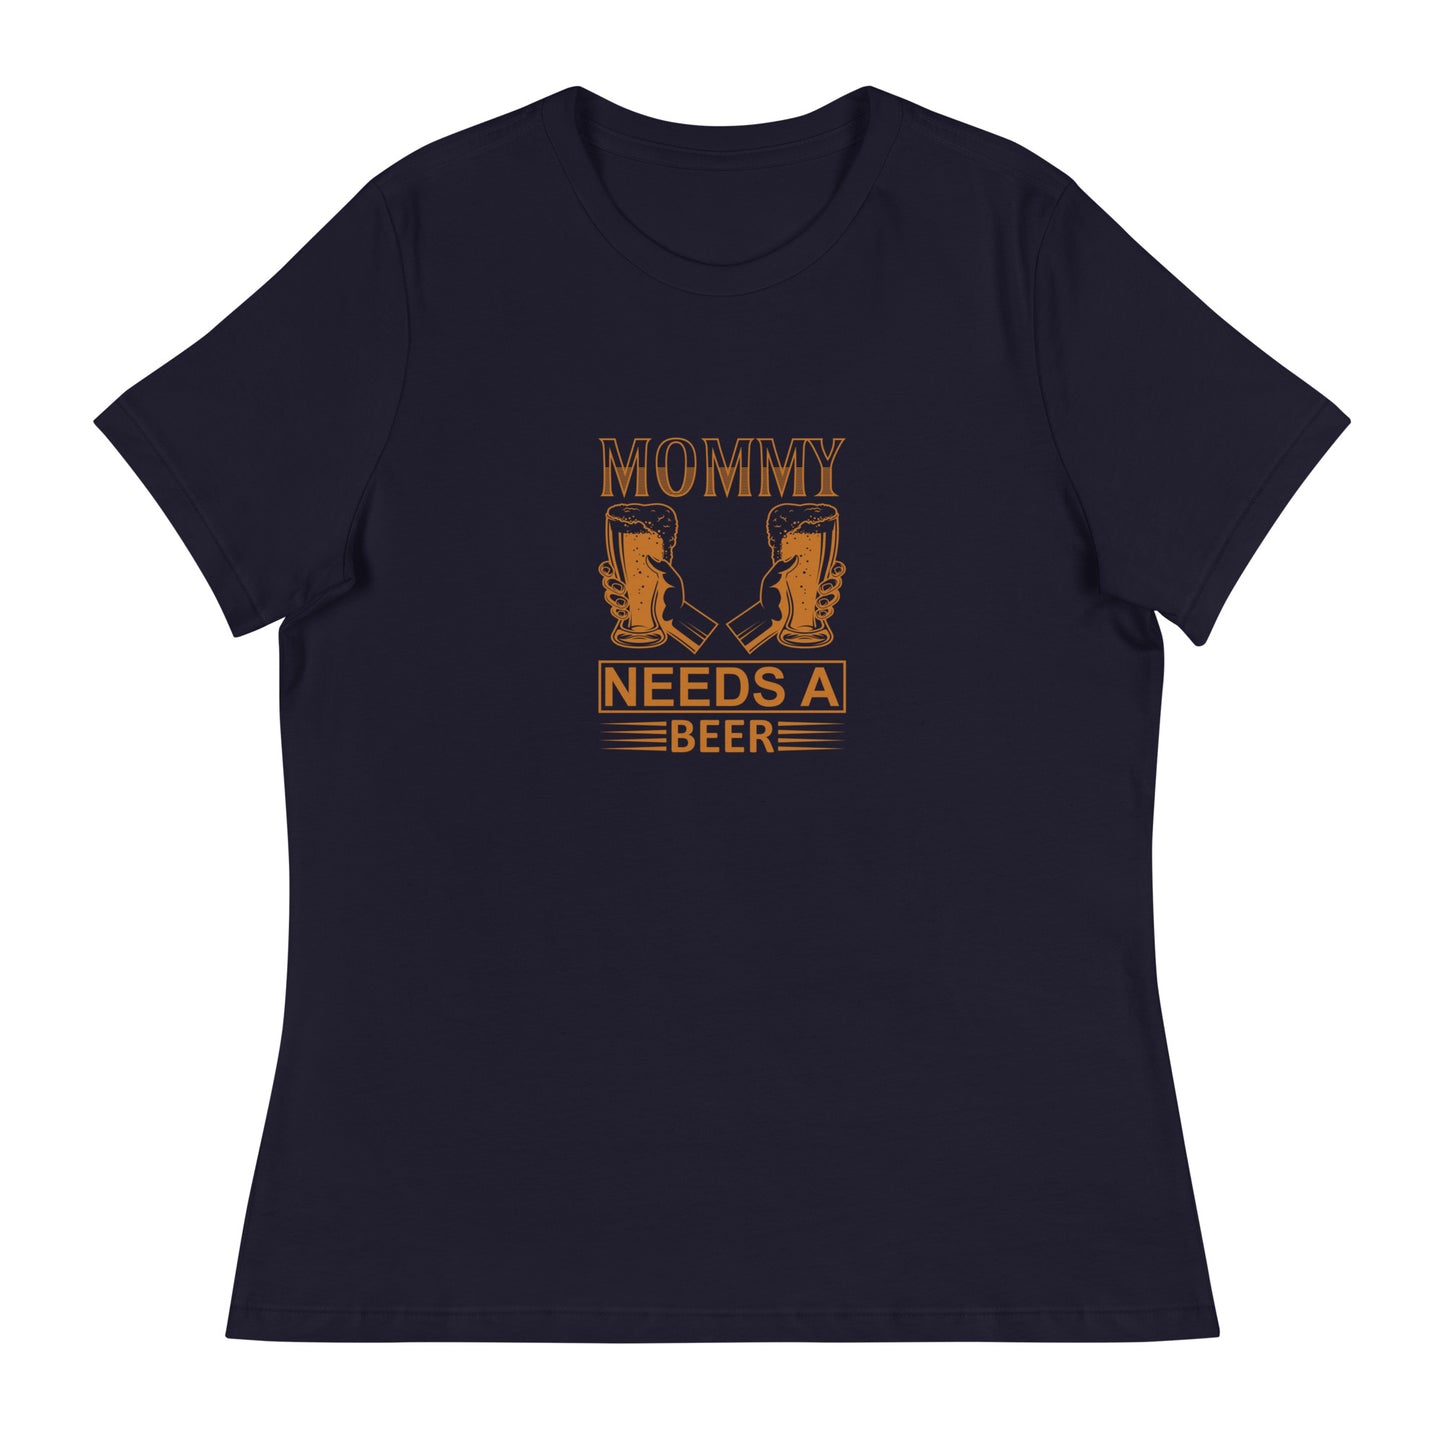 Women's Relaxed T-Shirt MOMMY NEEDS A BEER